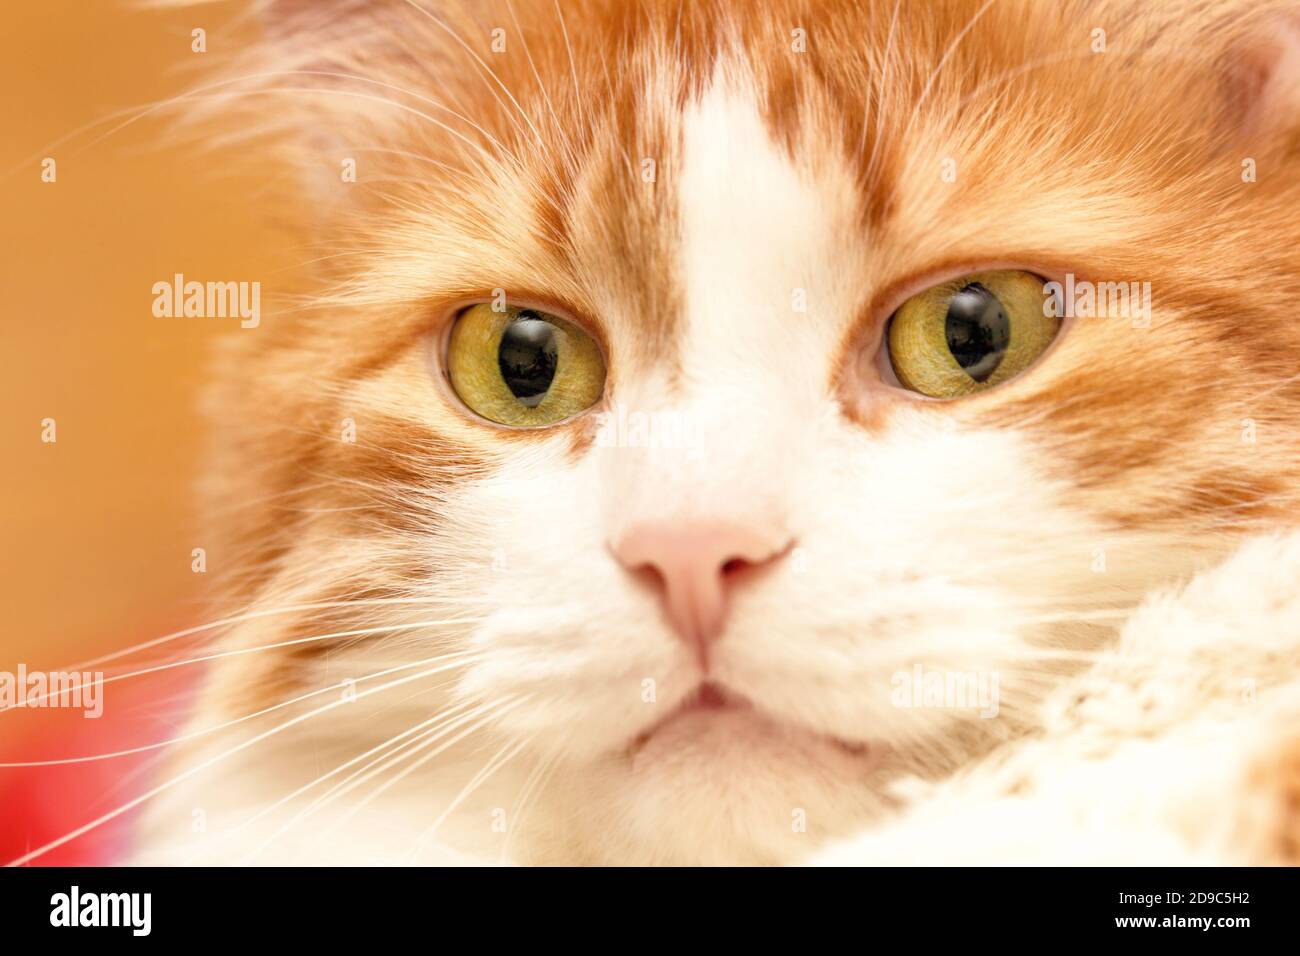 Charming closeup portrait of best adult red cat Stock Photo